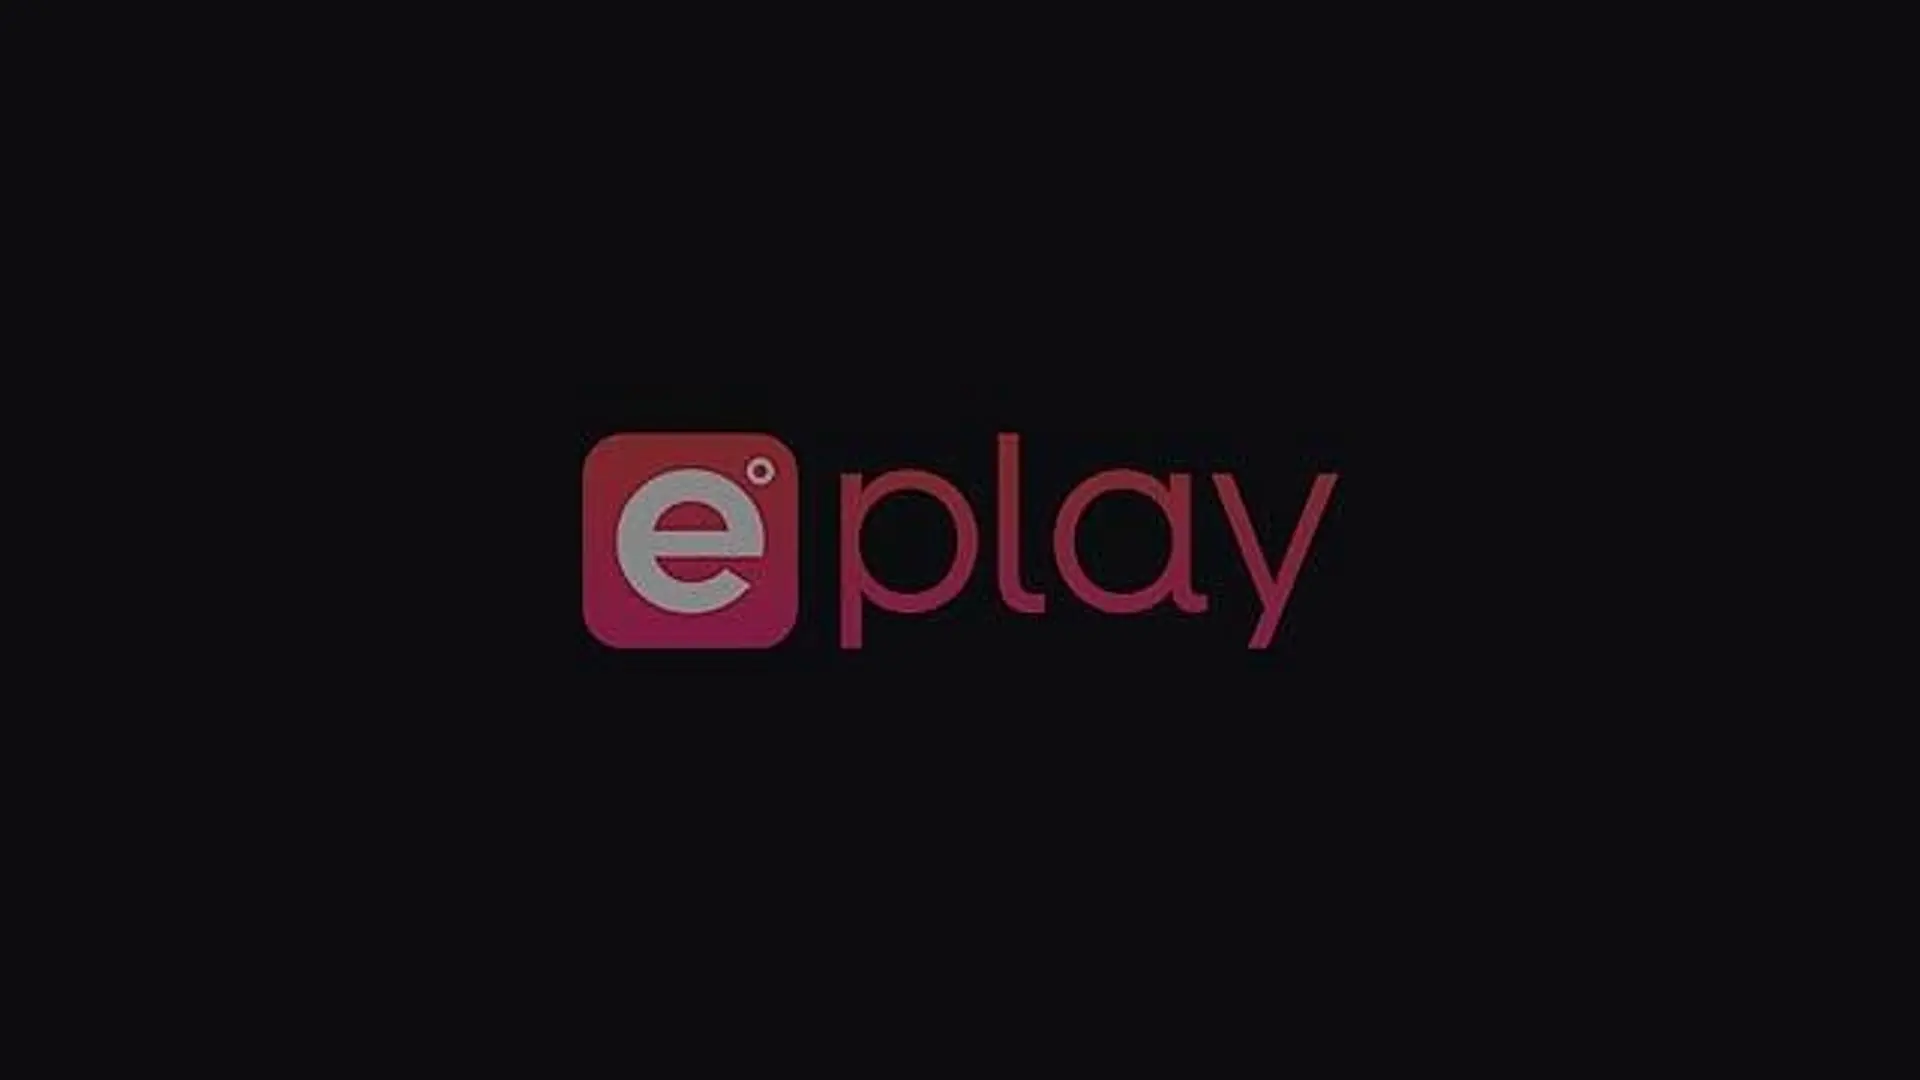 PatriciaKeys's ePlay Channel